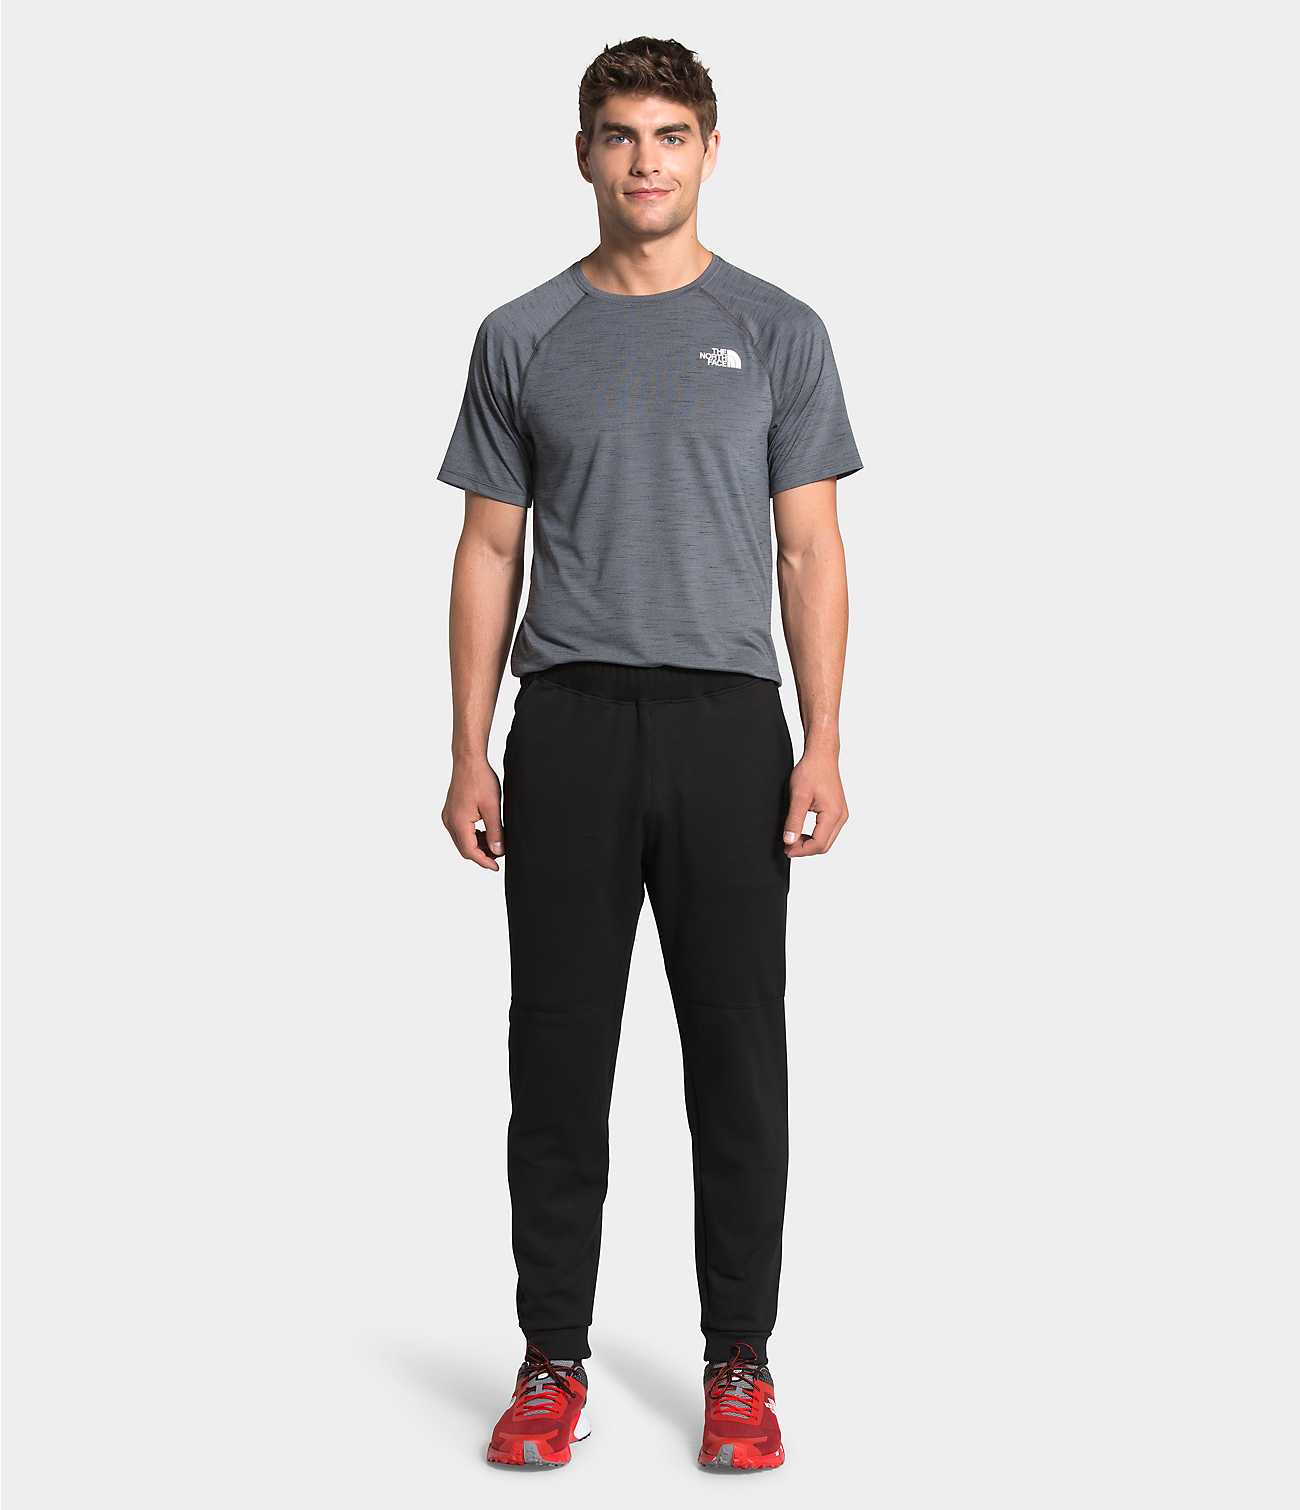 Must have running mid-layer pants for men